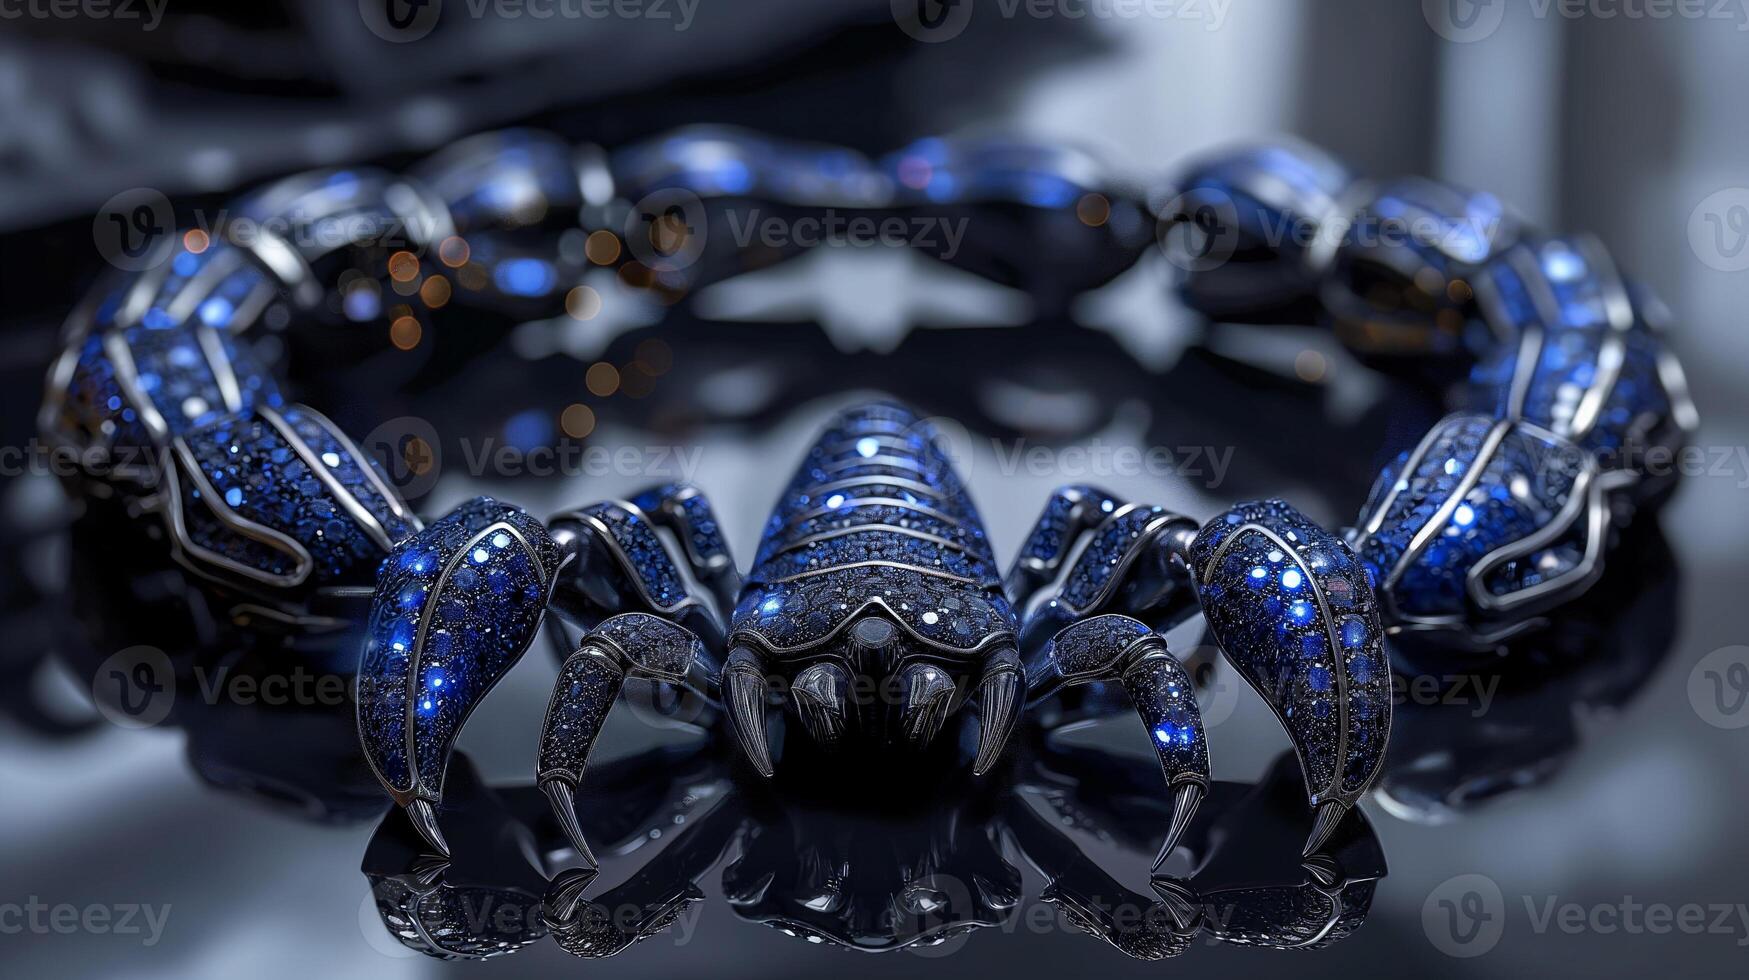 An edgy, futuristic scorpion-shaped bracelet featuring neon blue sapphires and polished silver. photo